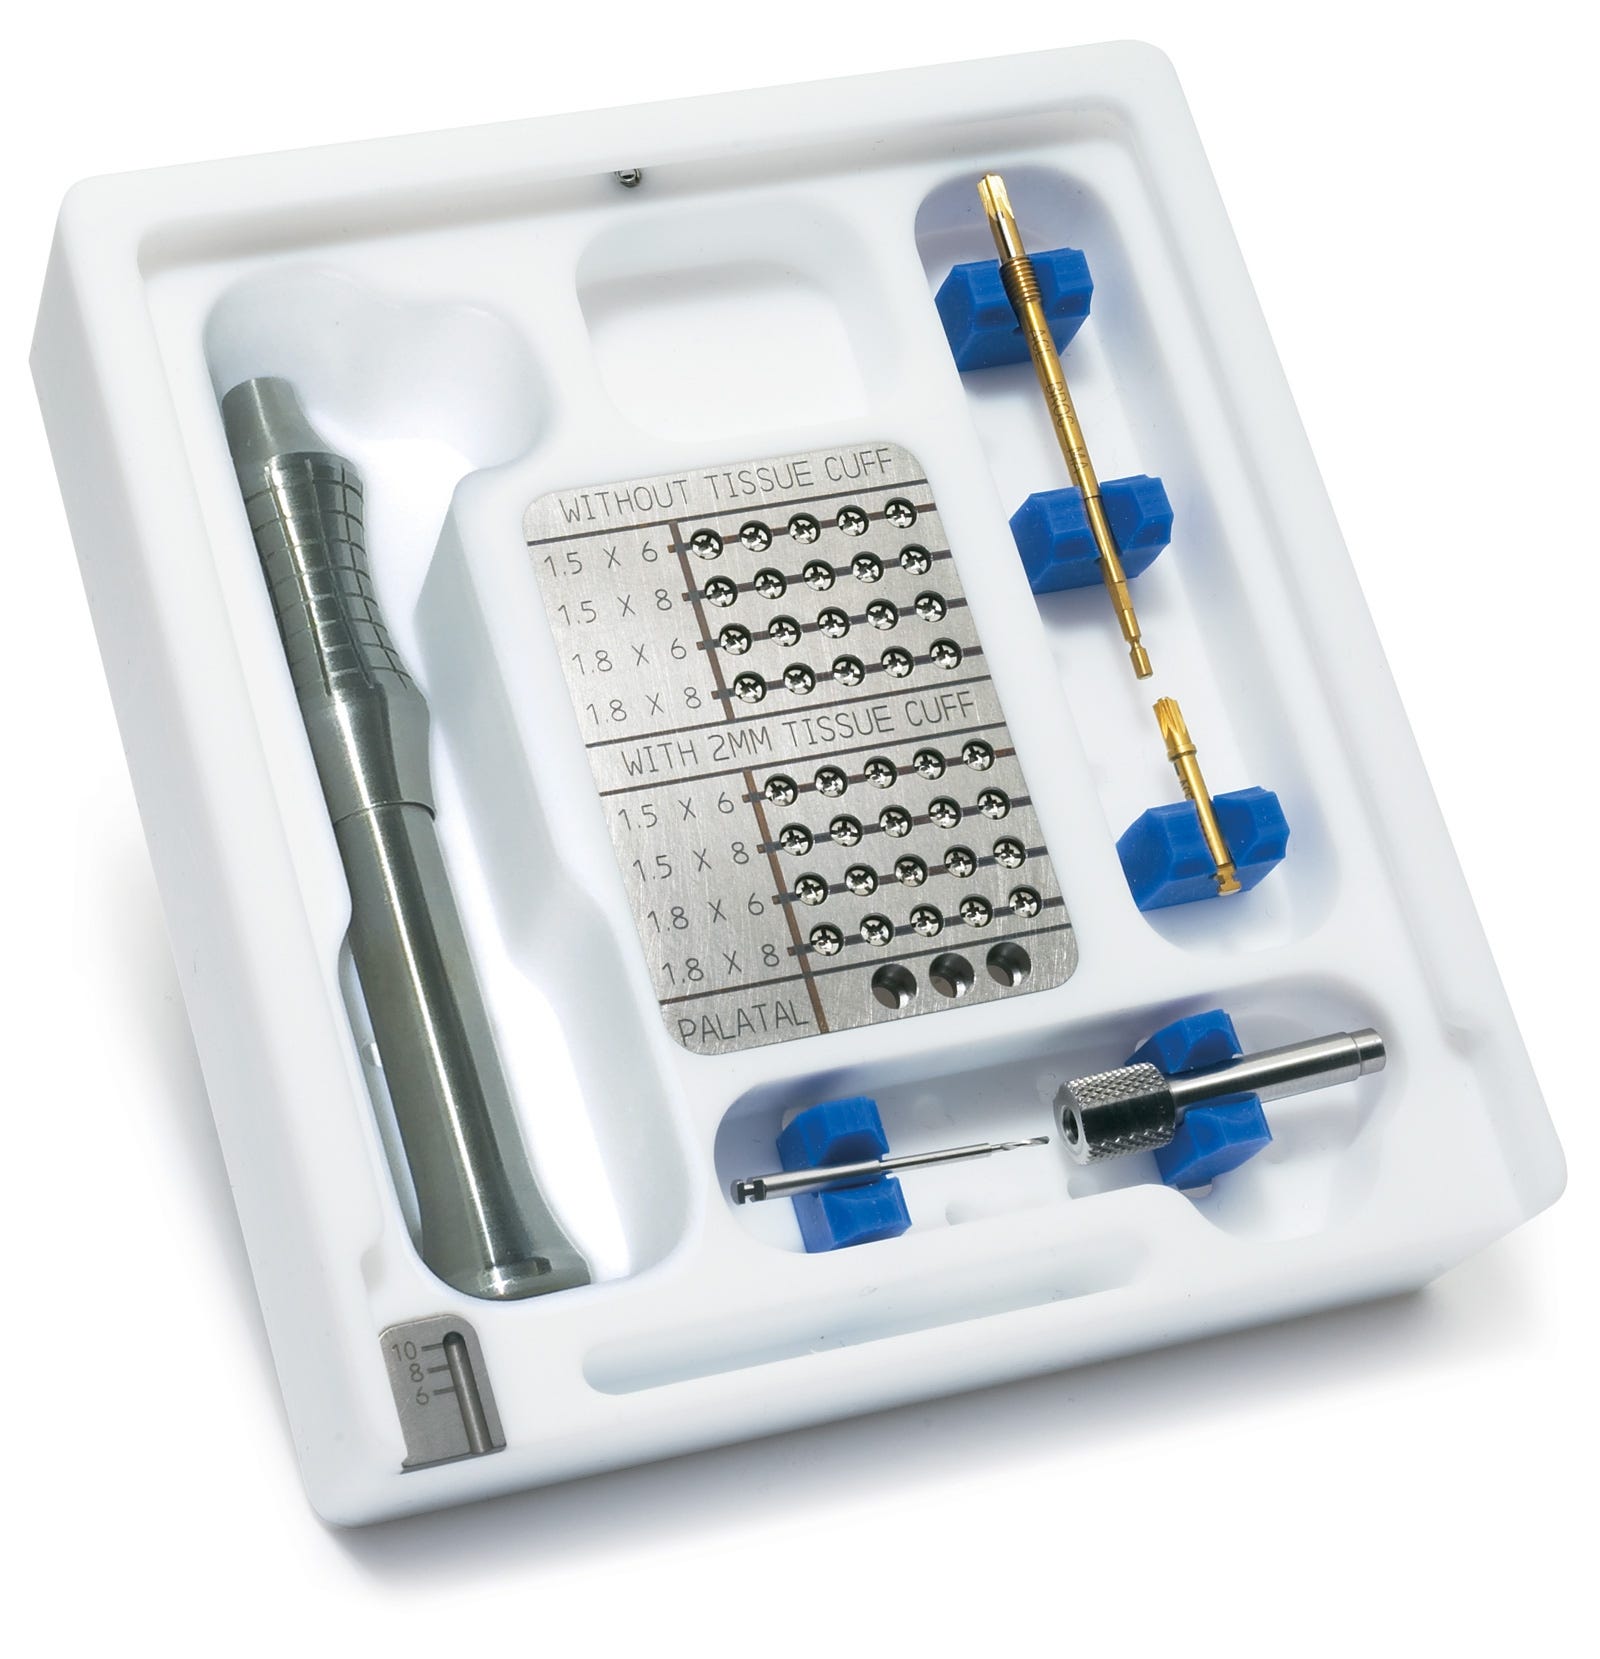 A.C.E. Orthodontic Kit complete with tools and tray